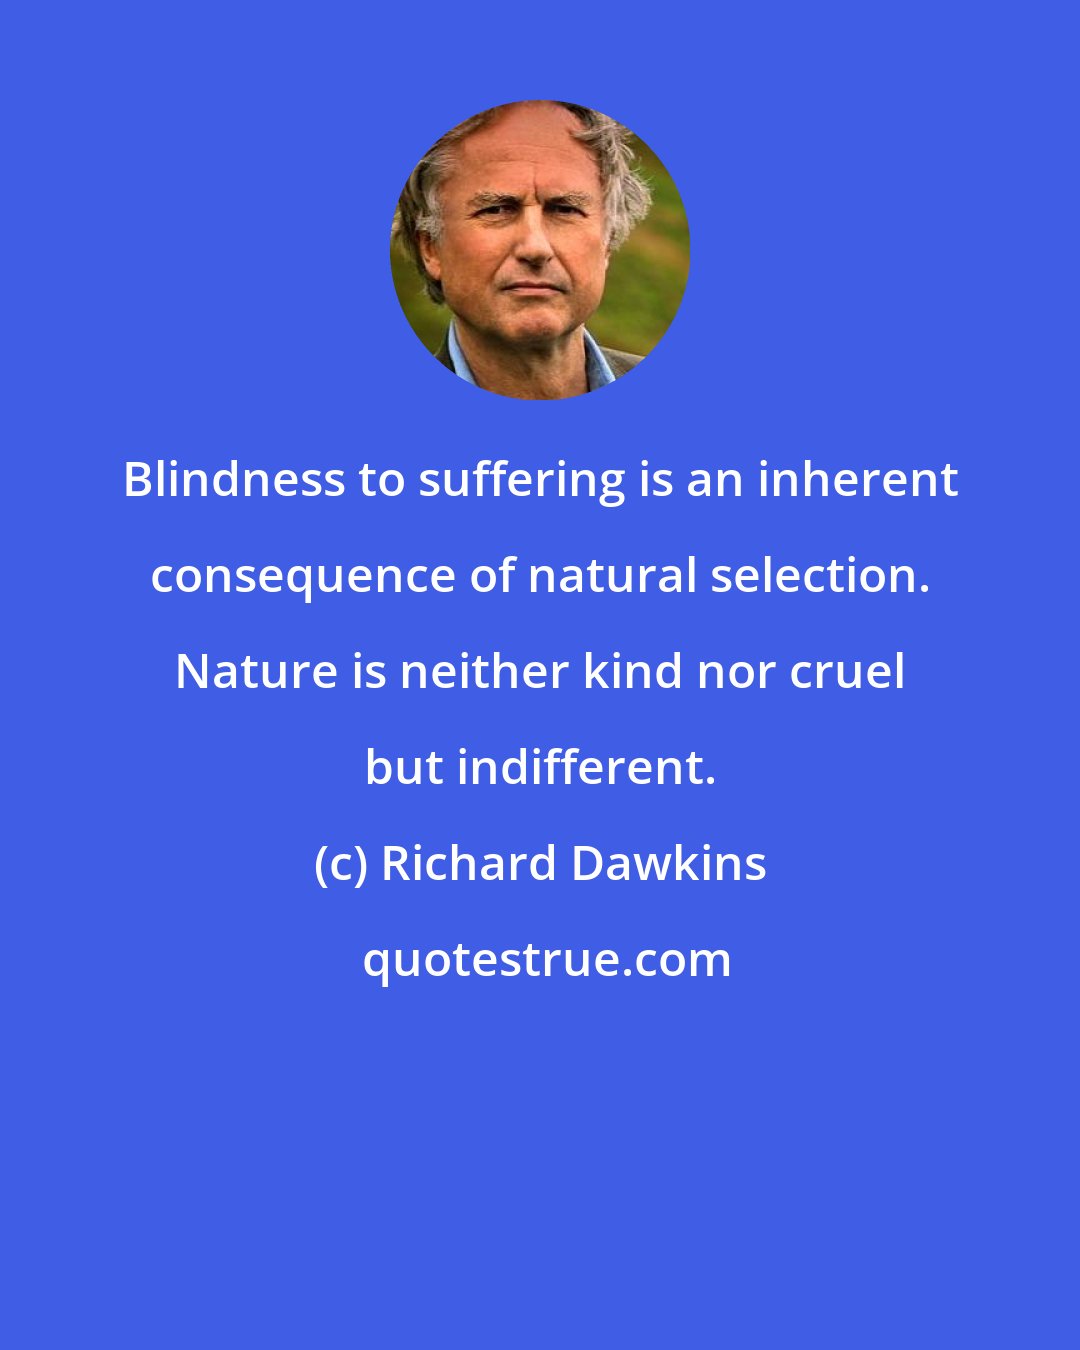 Richard Dawkins: Blindness to suffering is an inherent consequence of natural selection. Nature is neither kind nor cruel but indifferent.